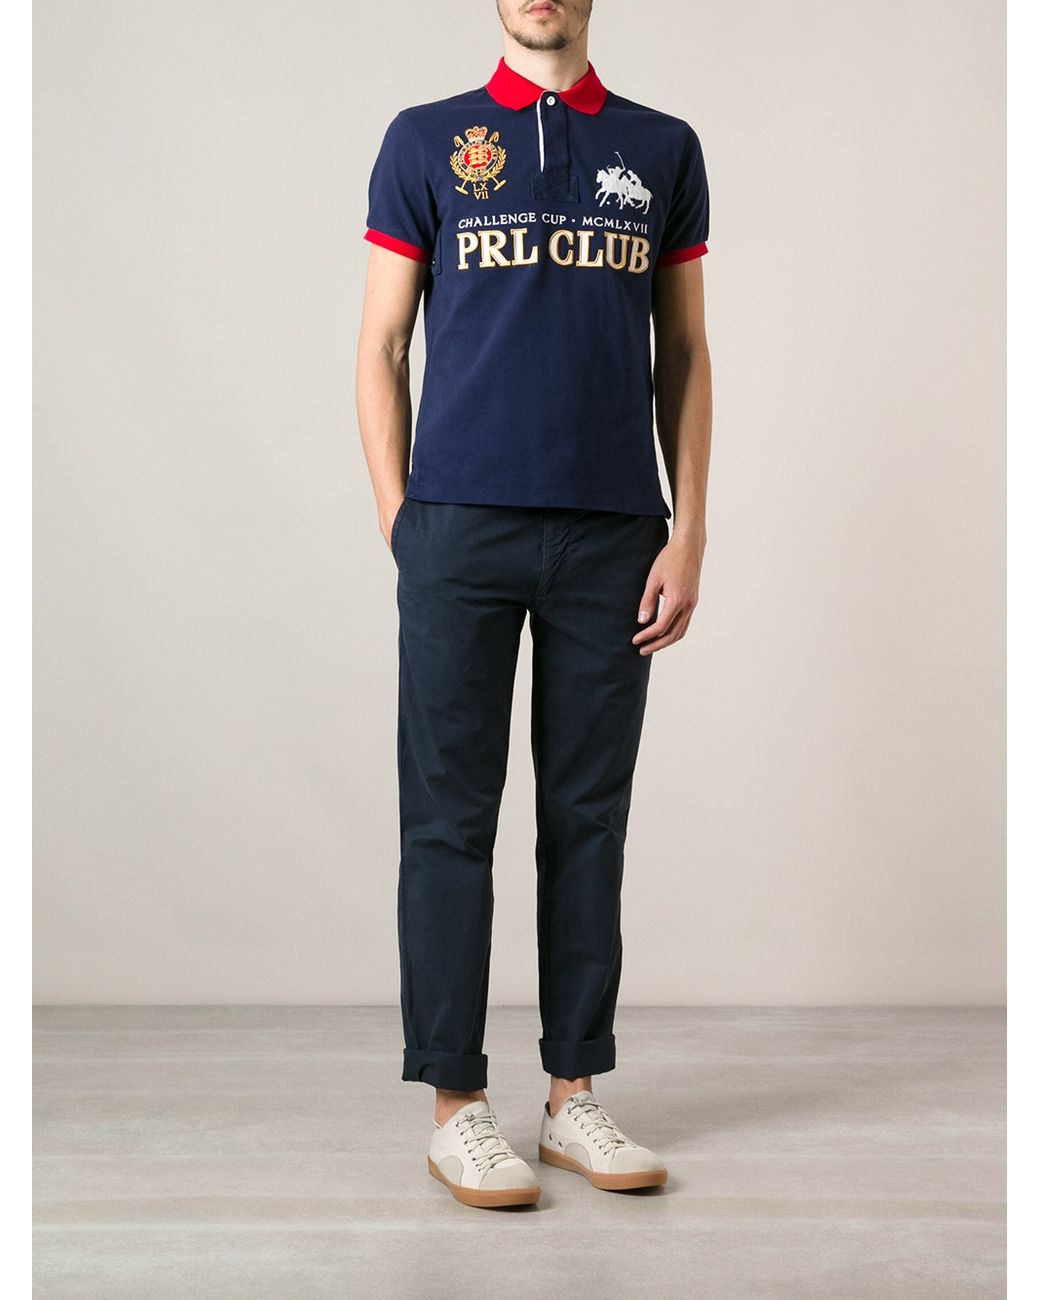 Polo Ralph Lauren Prl Club Polo Shirt in Blue for Men | Lyst